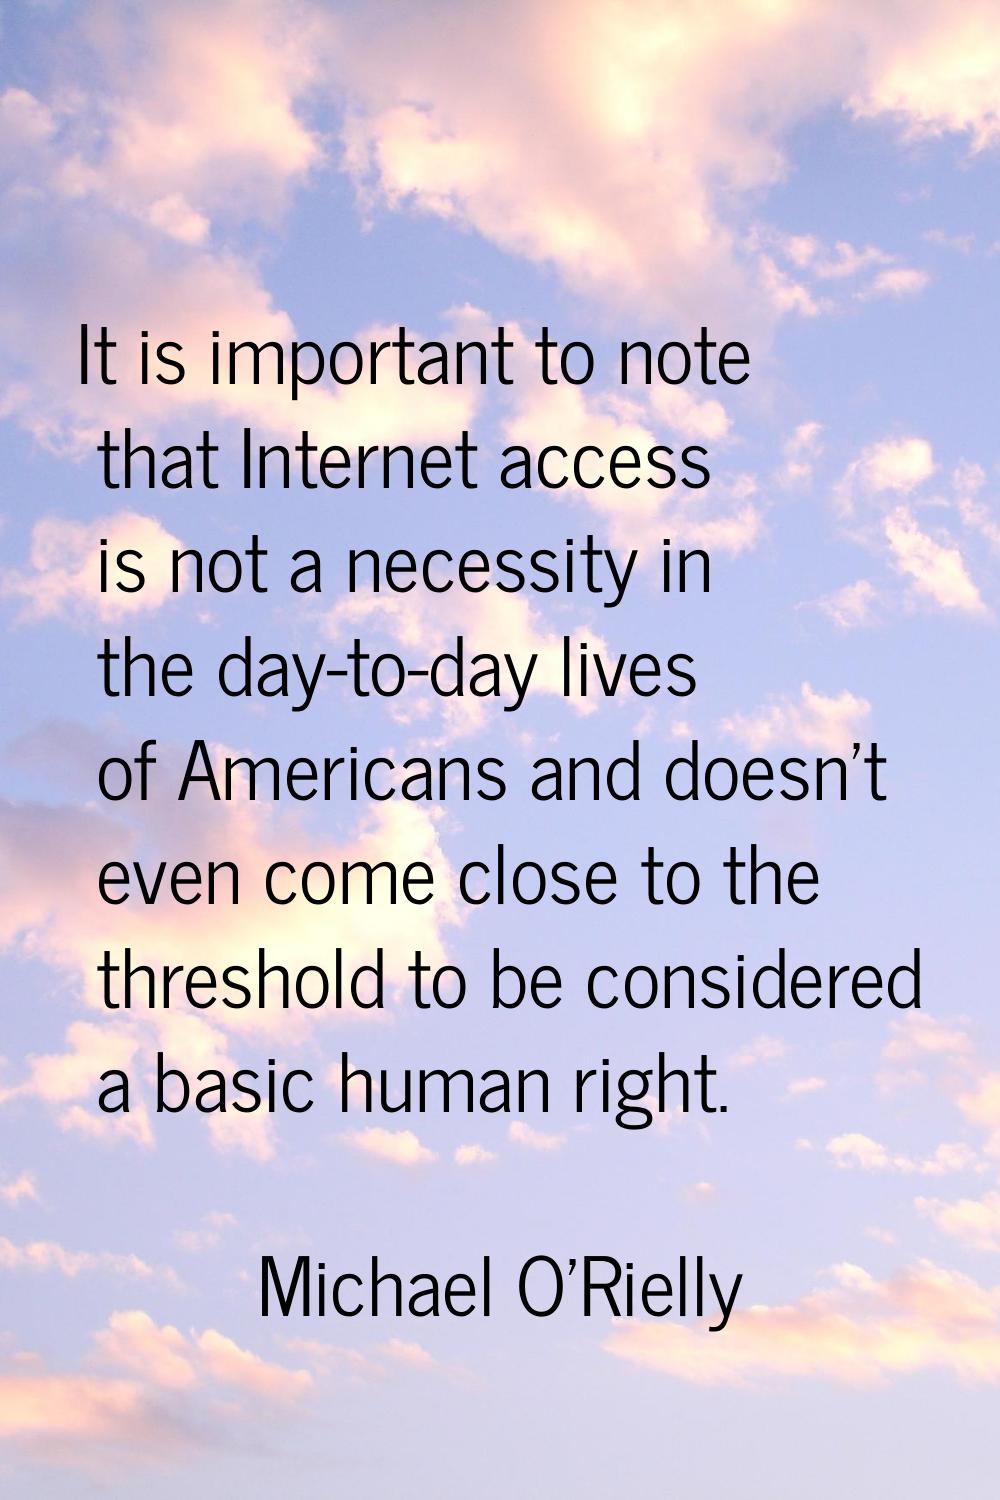 It is important to note that Internet access is not a necessity in the day-to-day lives of American